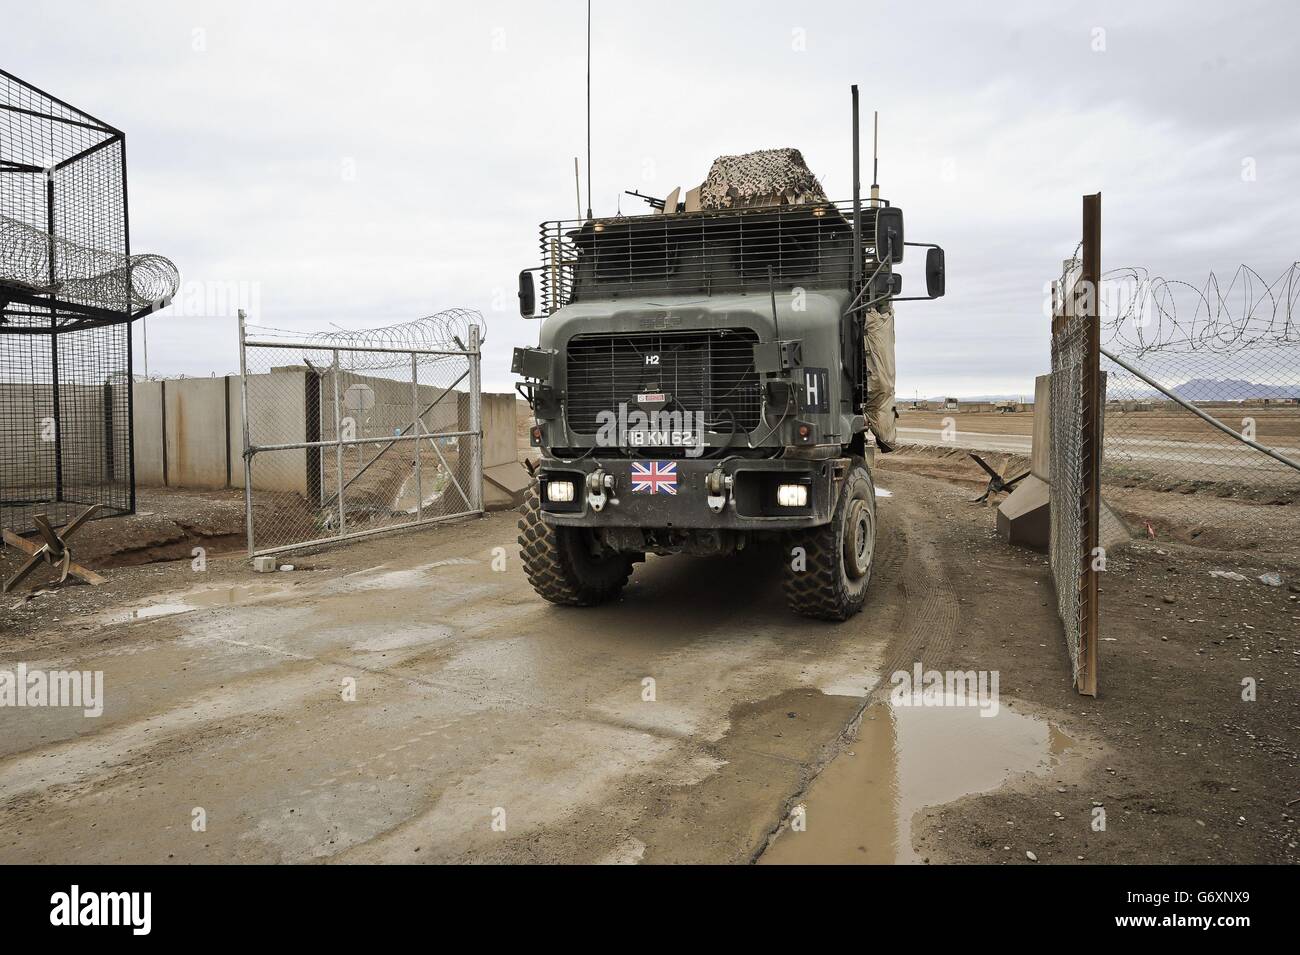 The very last British Combat Logistics Patrol (CLP) arriving at the gates of Camp Bastion making the last road move to recover equipment and material from closed down UK operating bases in Helmand Province, Afghanistan. 15/03/14. Stock Photo